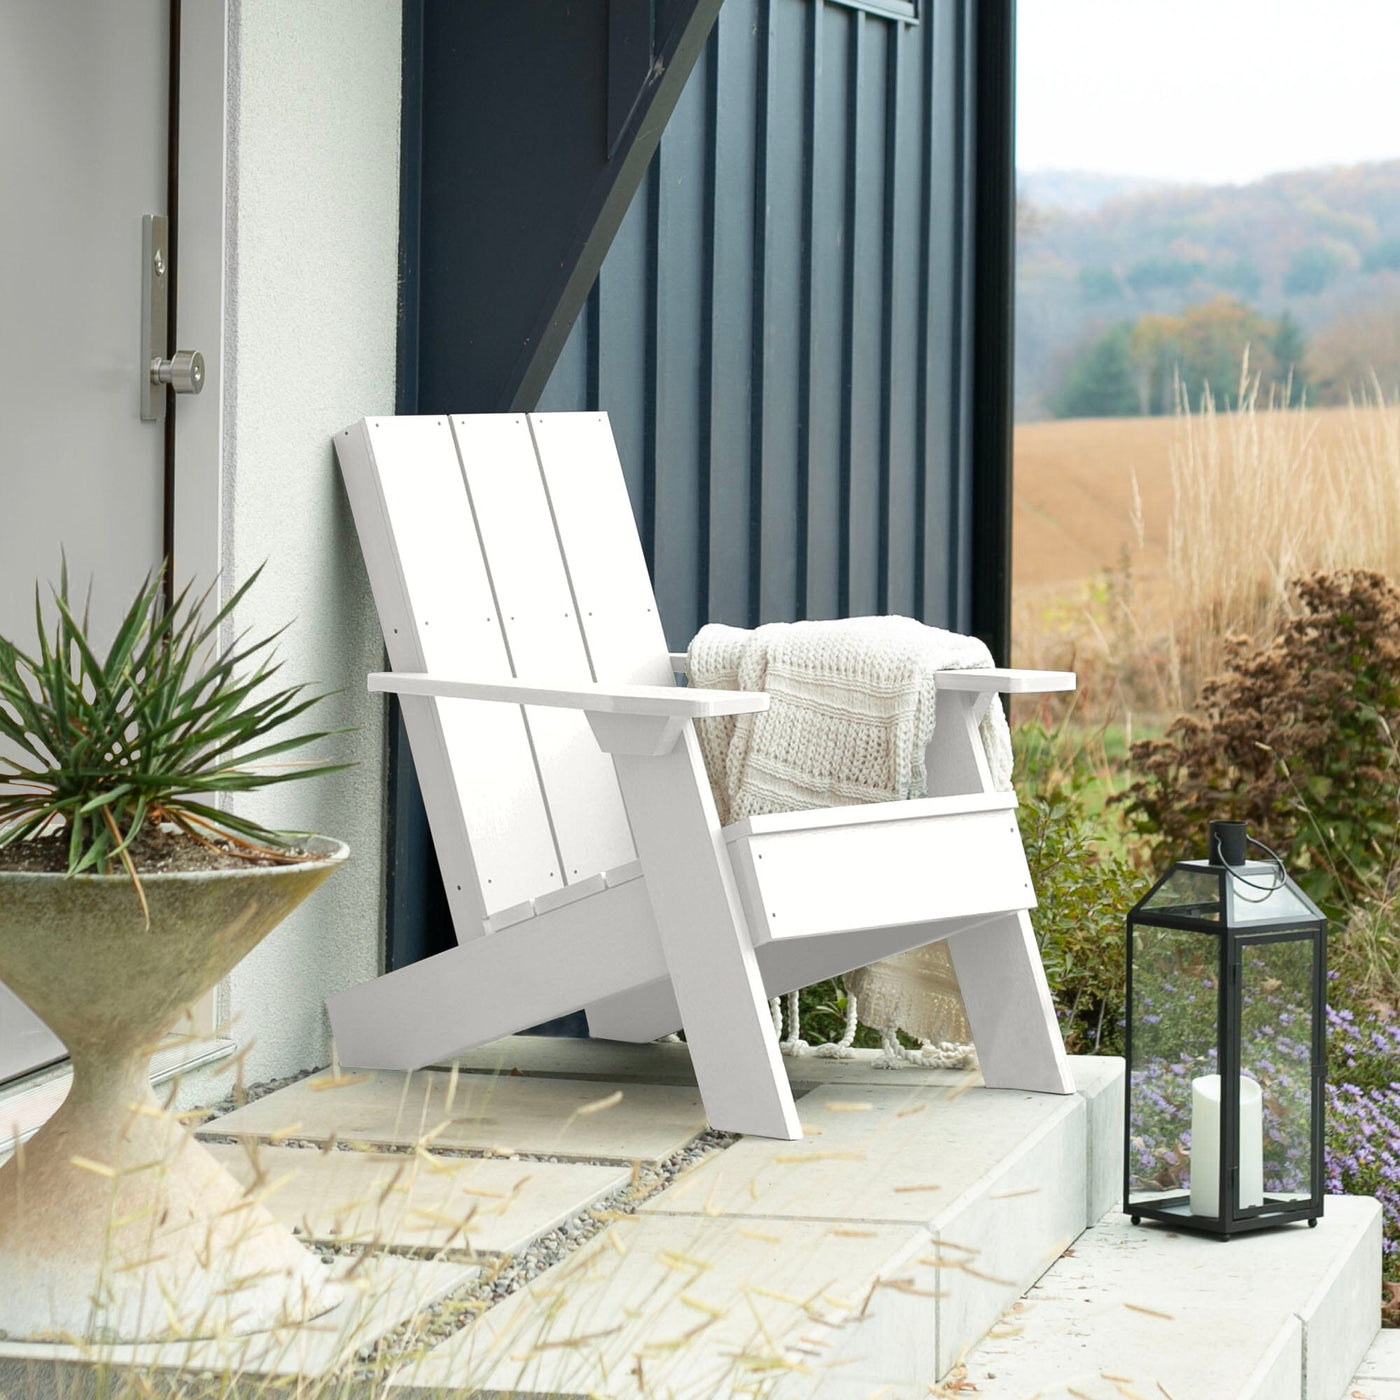 White Italica Modern Adirondack chair on porch with blanket and lantern